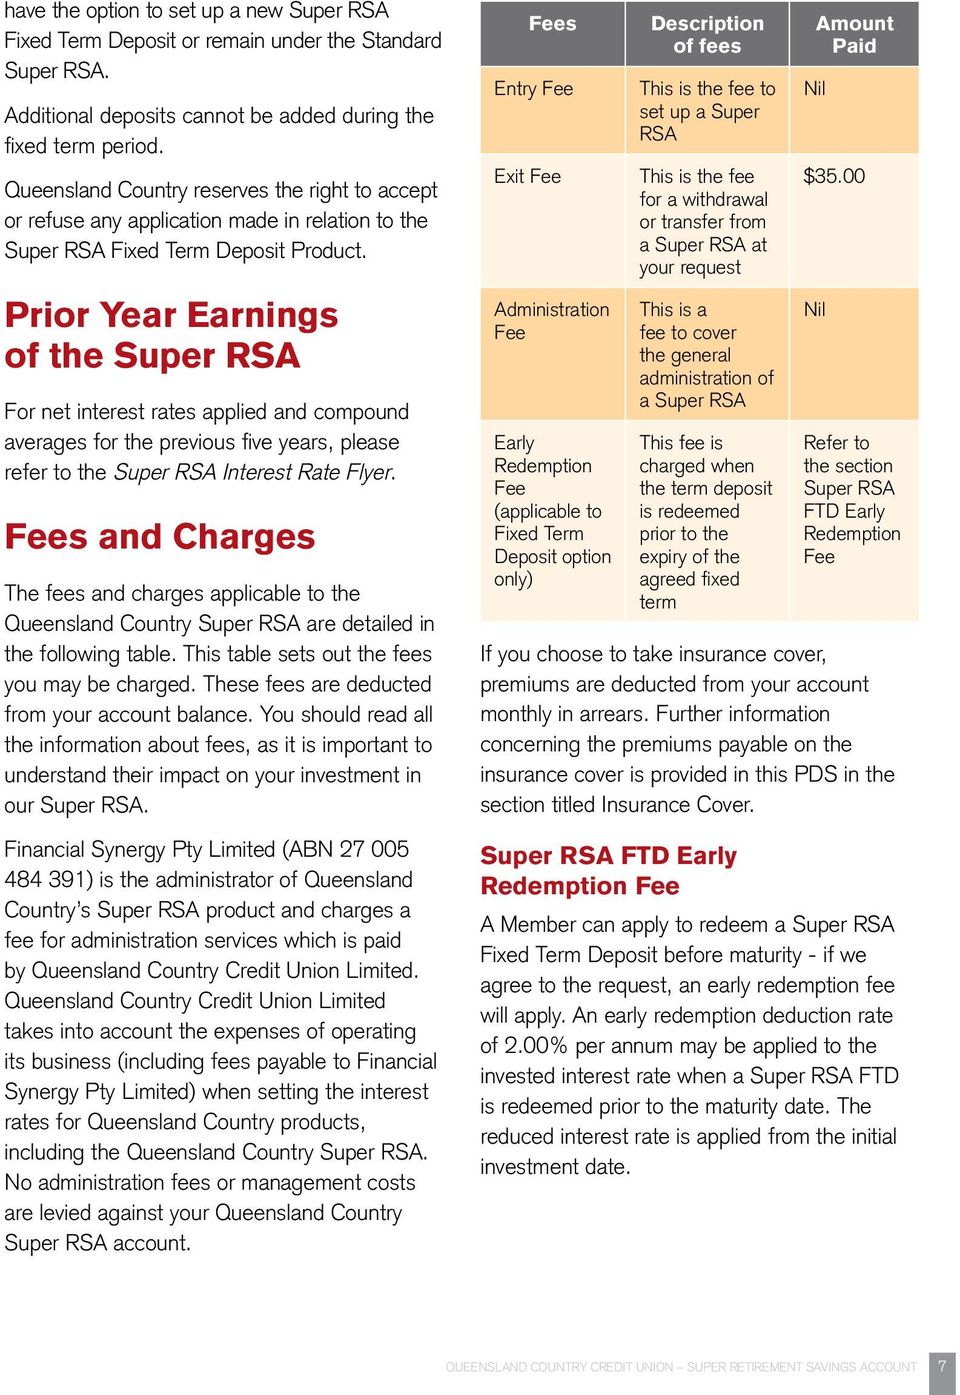 Prior Year Earnings of the Super RSA For net interest rates applied and compound averages for the previous five years, please refer to the Super RSA Interest Rate Flyer.